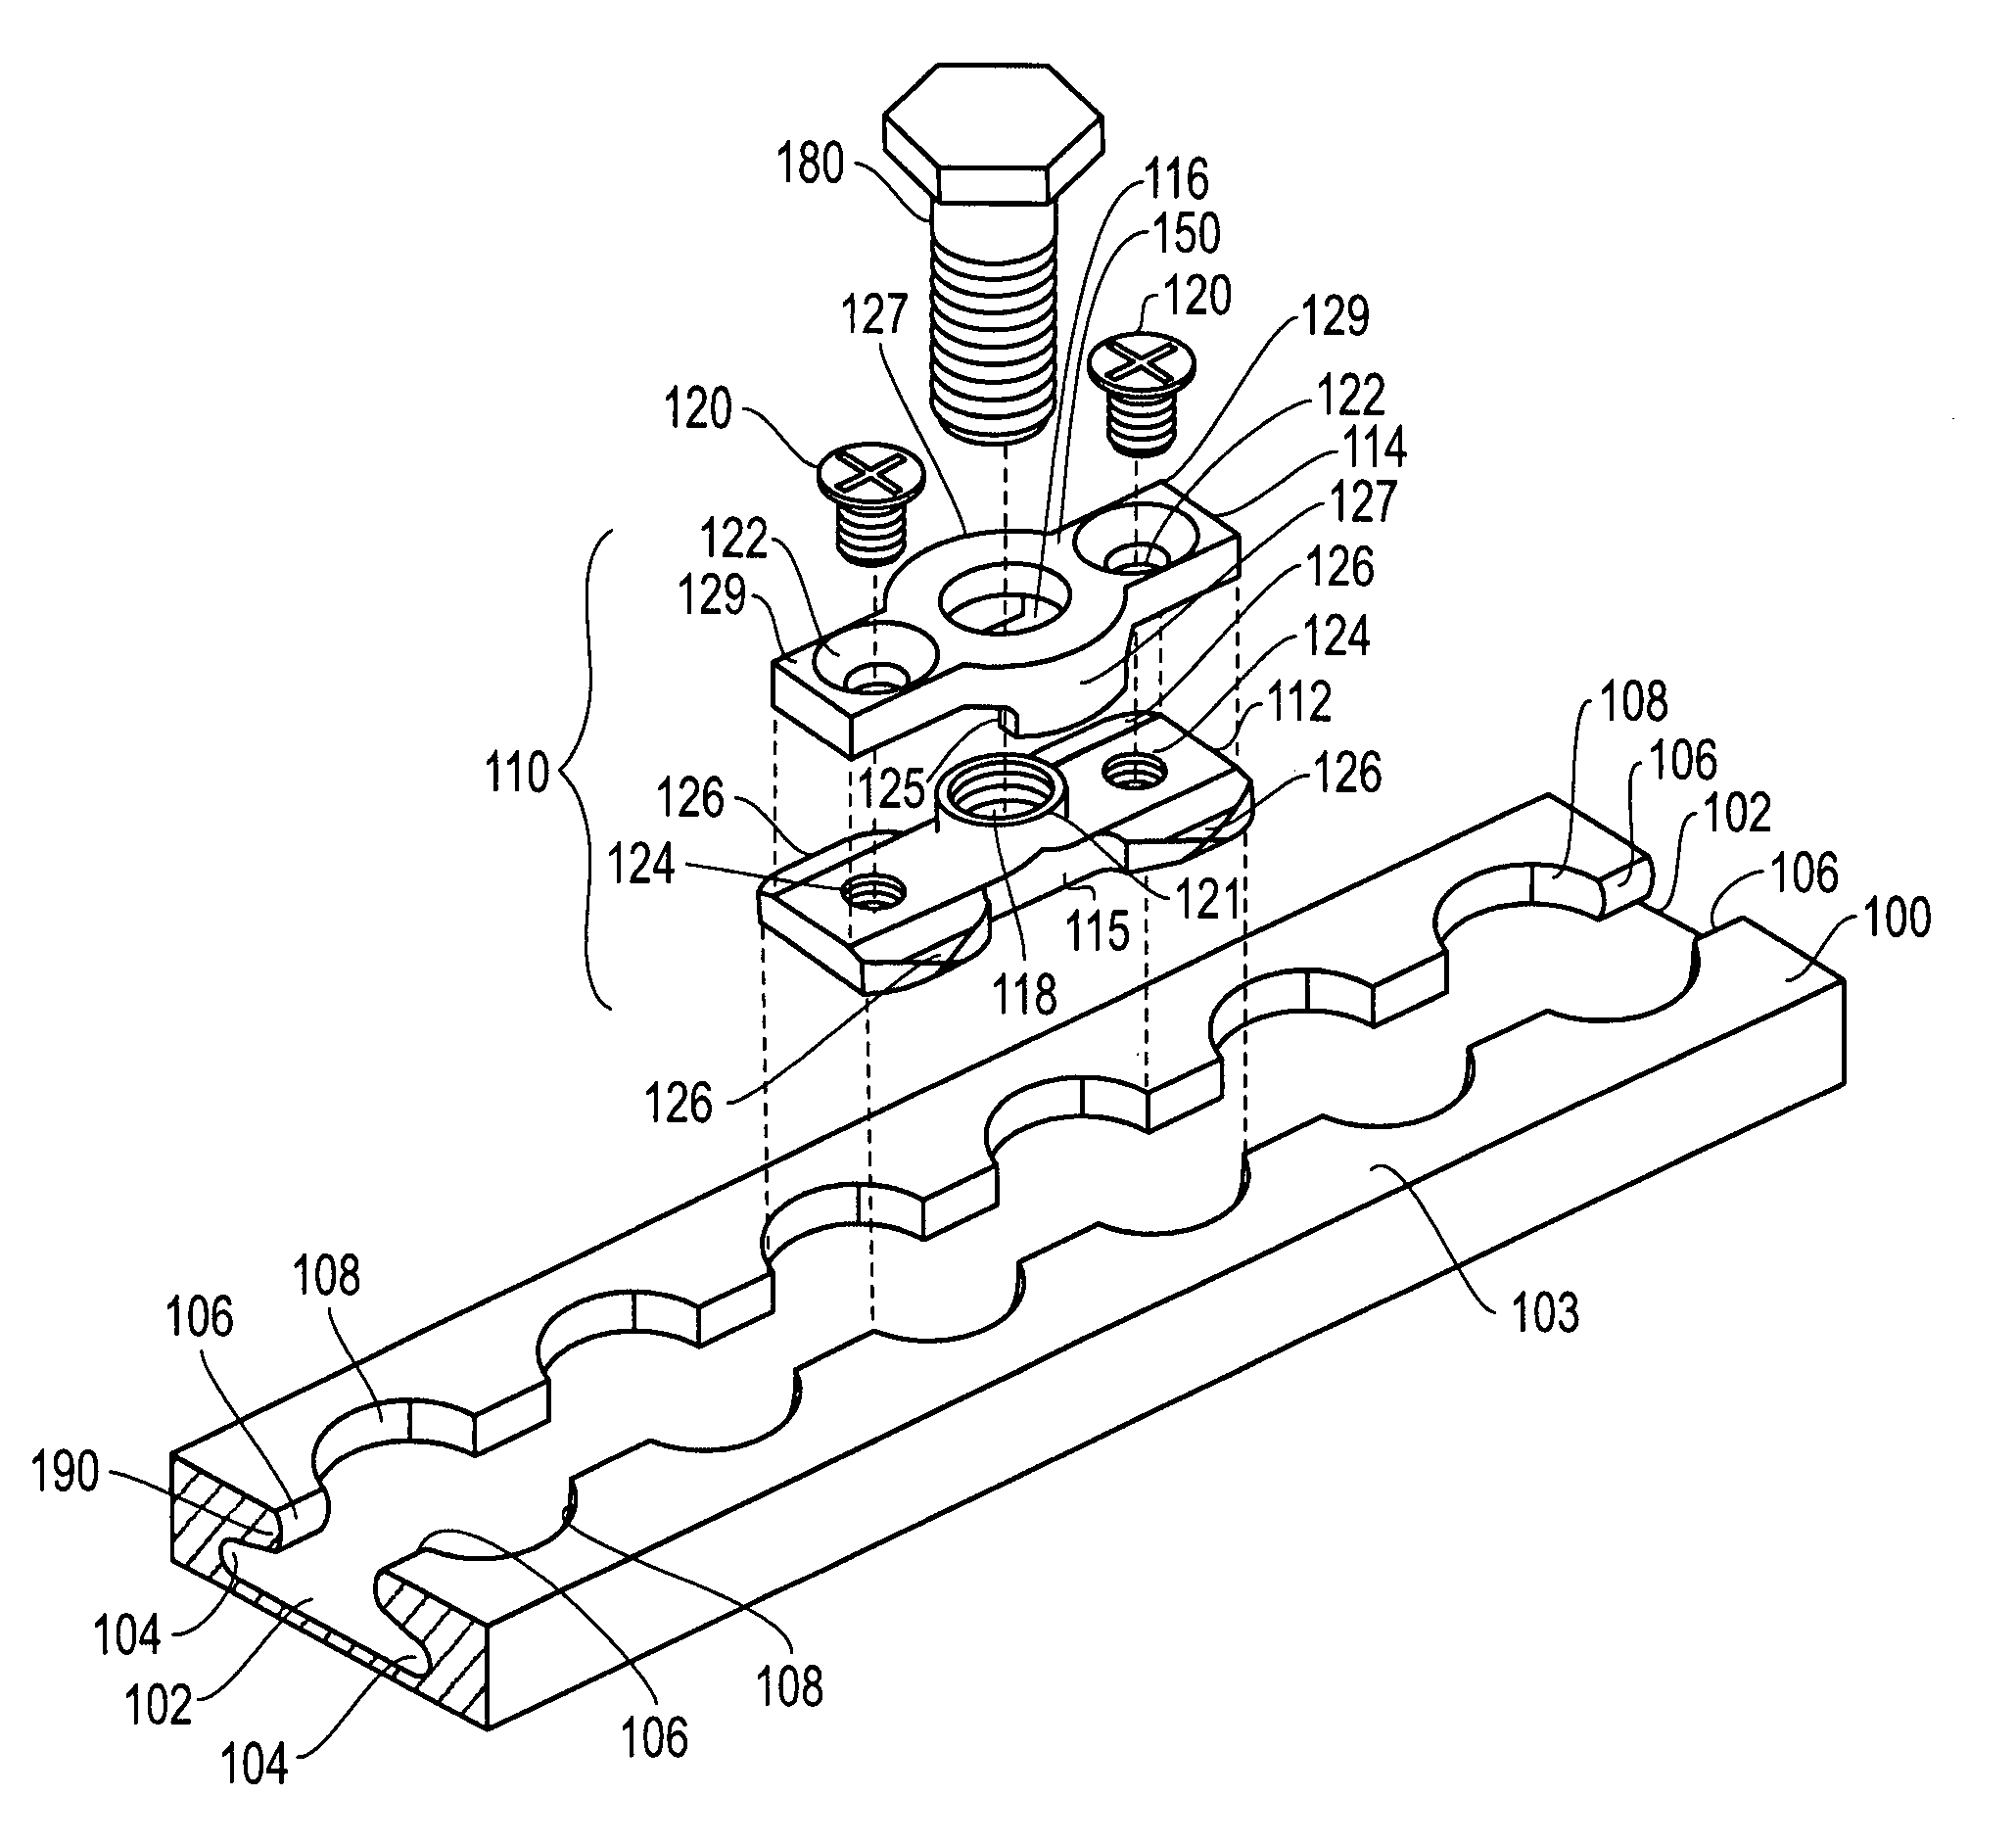 Systems and methods for securing components